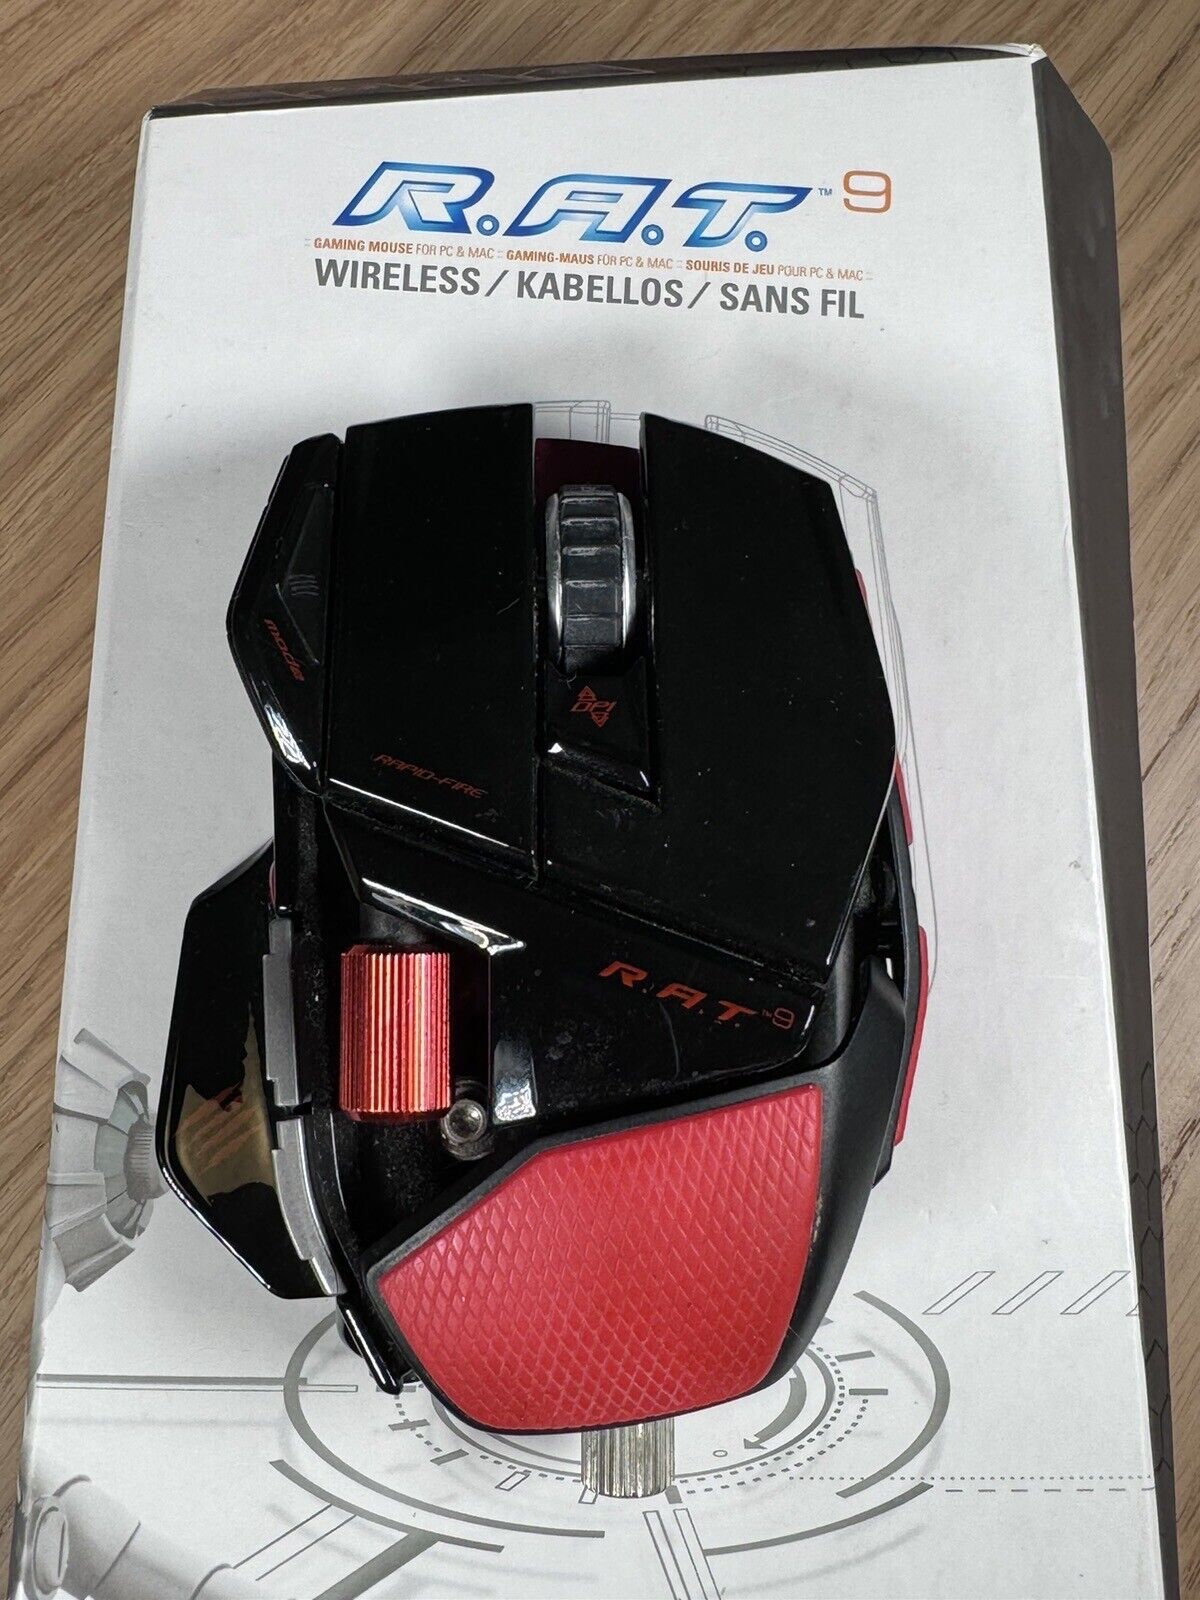 🔥Mad Catz R.A.T. Rat 9 Wireless Gaming Mouse | Gloss Black Red | Extremely Rare